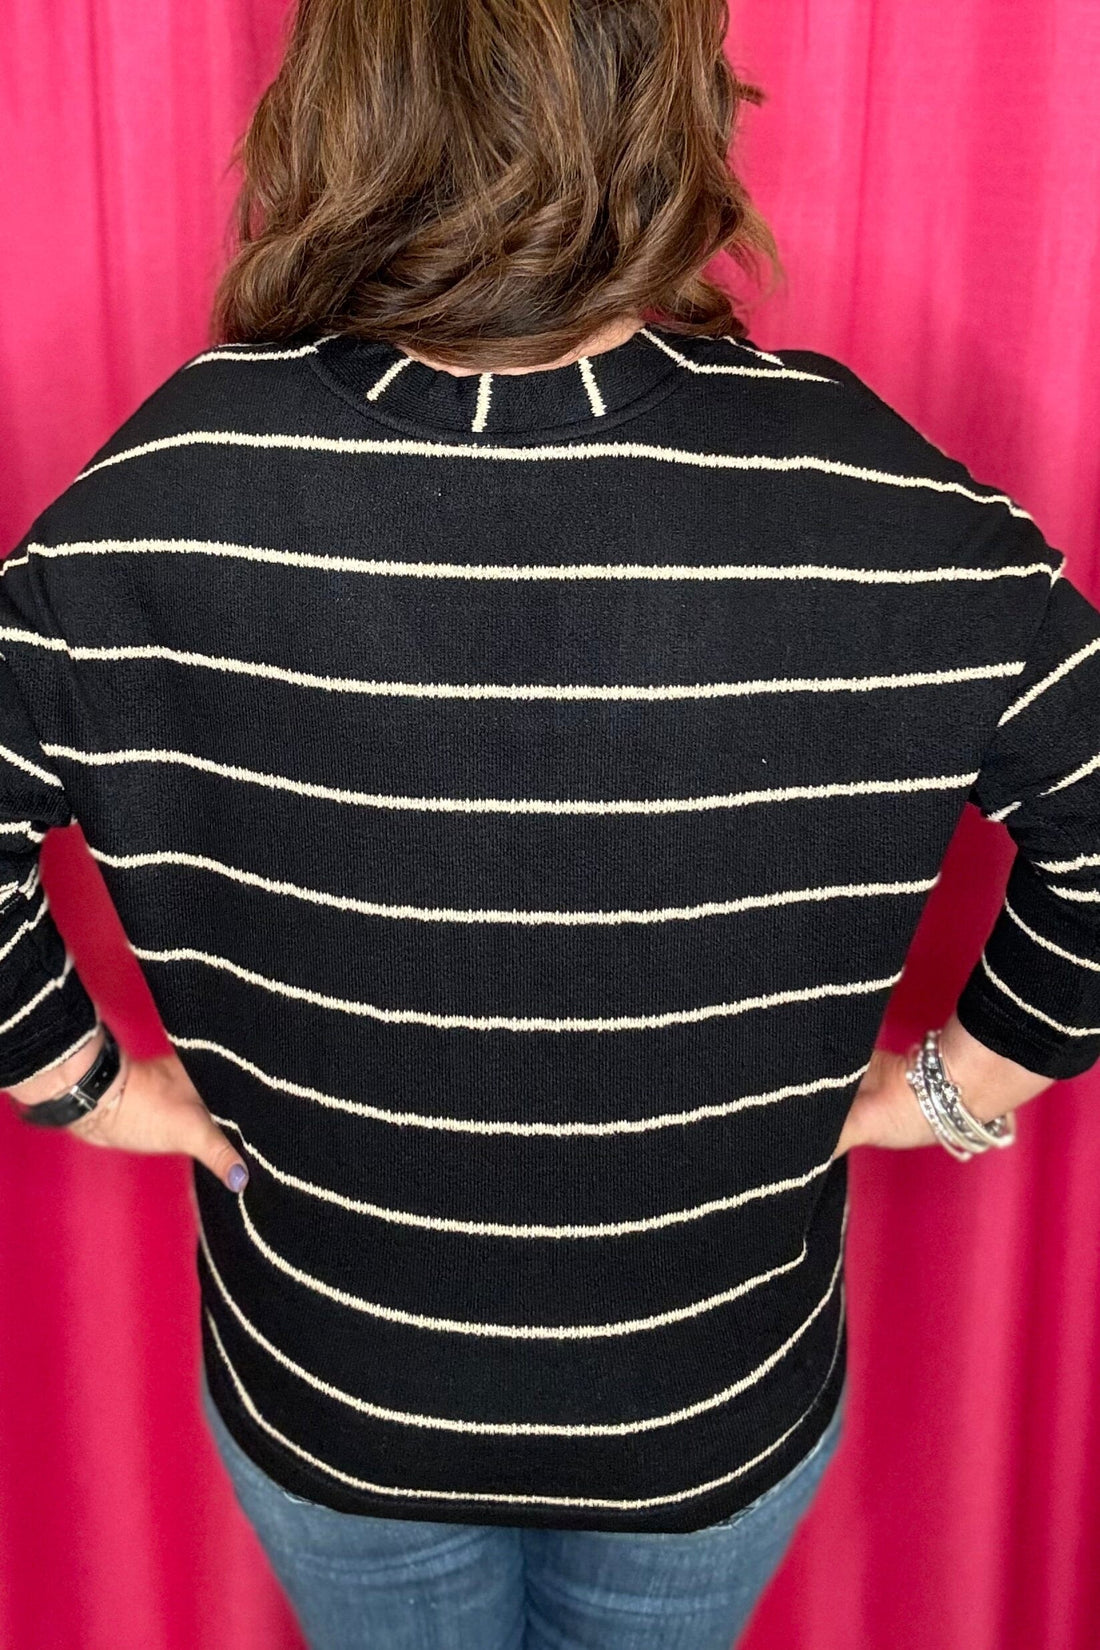 V-Neck Striped Sweater JRTOP CASUAL TOP BLUPEPPER 